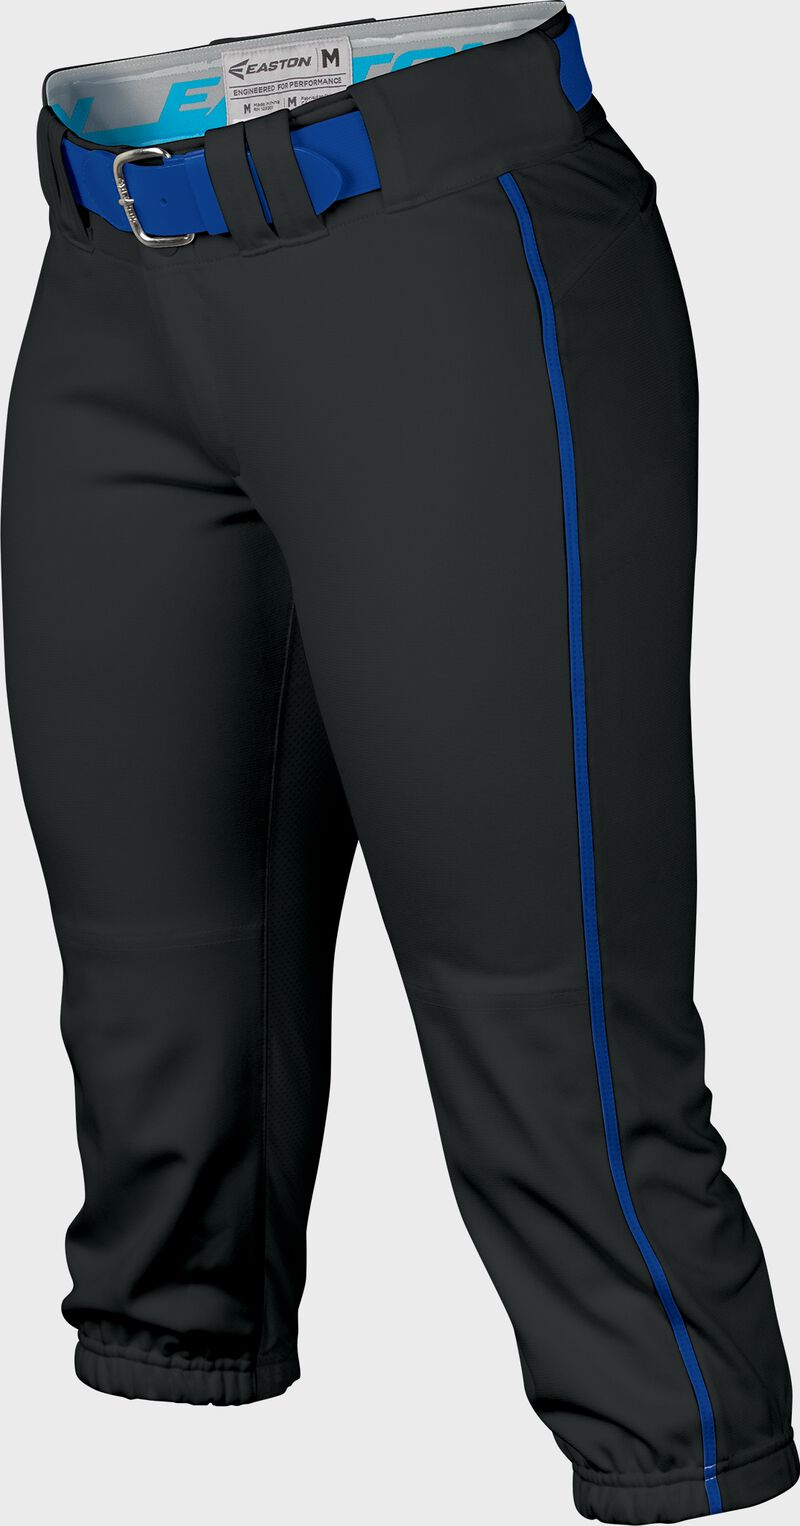 Easton Prowess Softball Pant Women's Piped BLACK/ROYAL  S